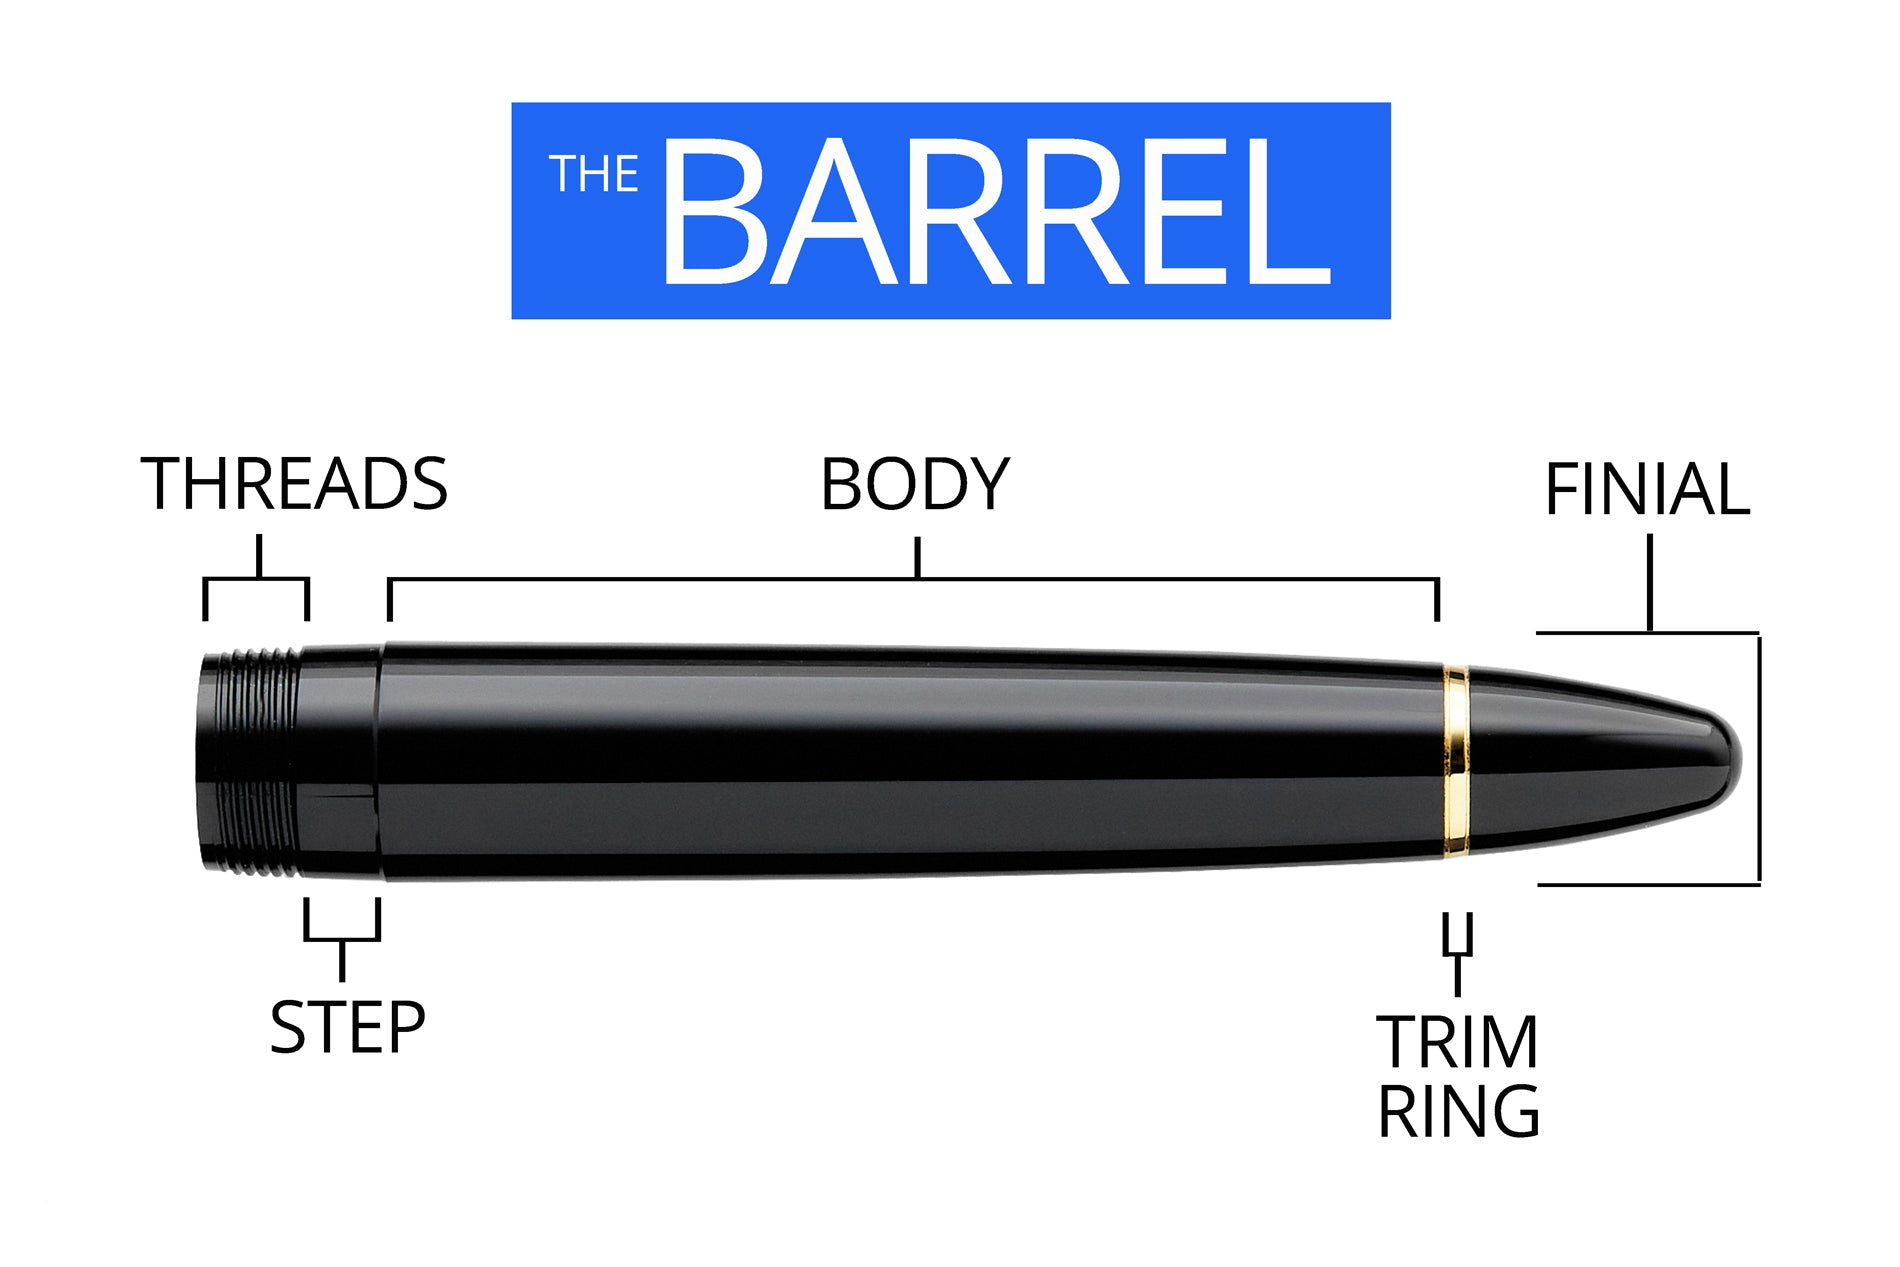 Infographic showing labeled parts of a fountain pen barrel